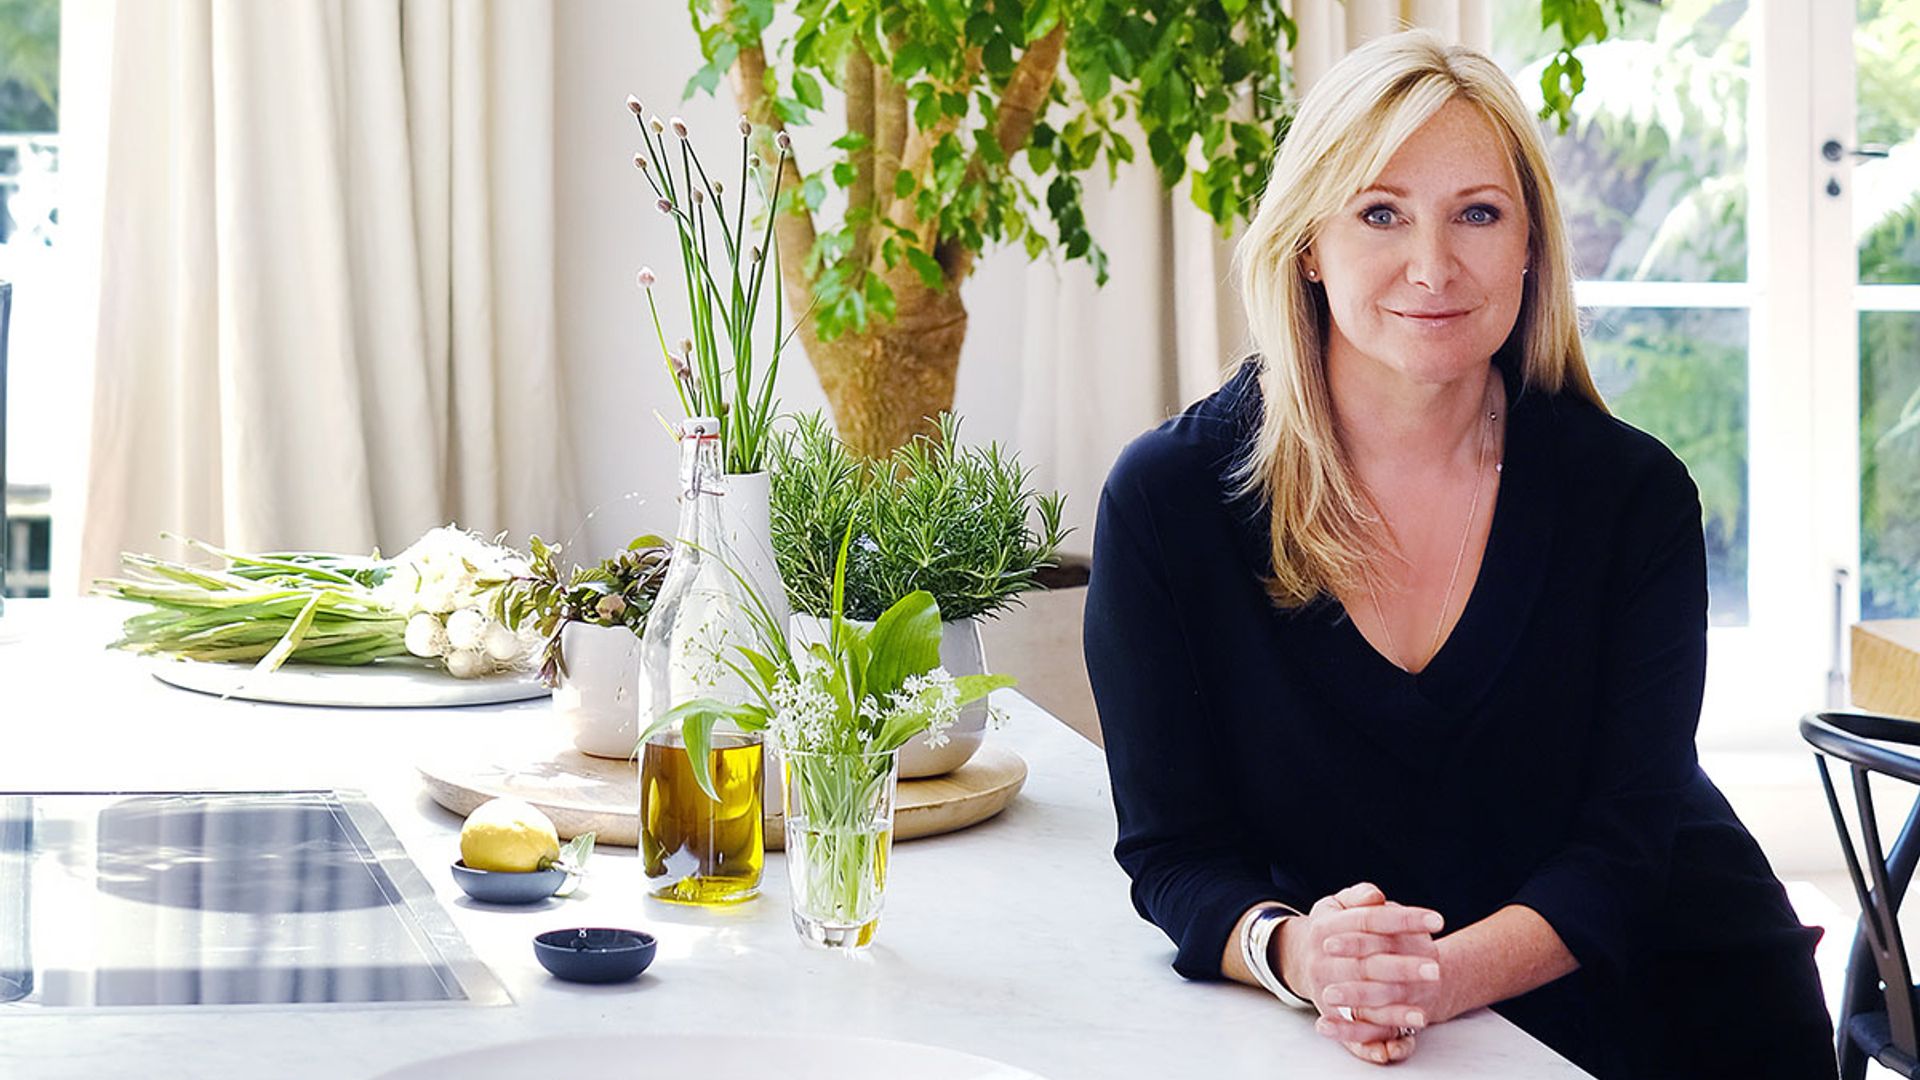 The White Company founder Chrissie Rucker shares a tour of her stunning family home